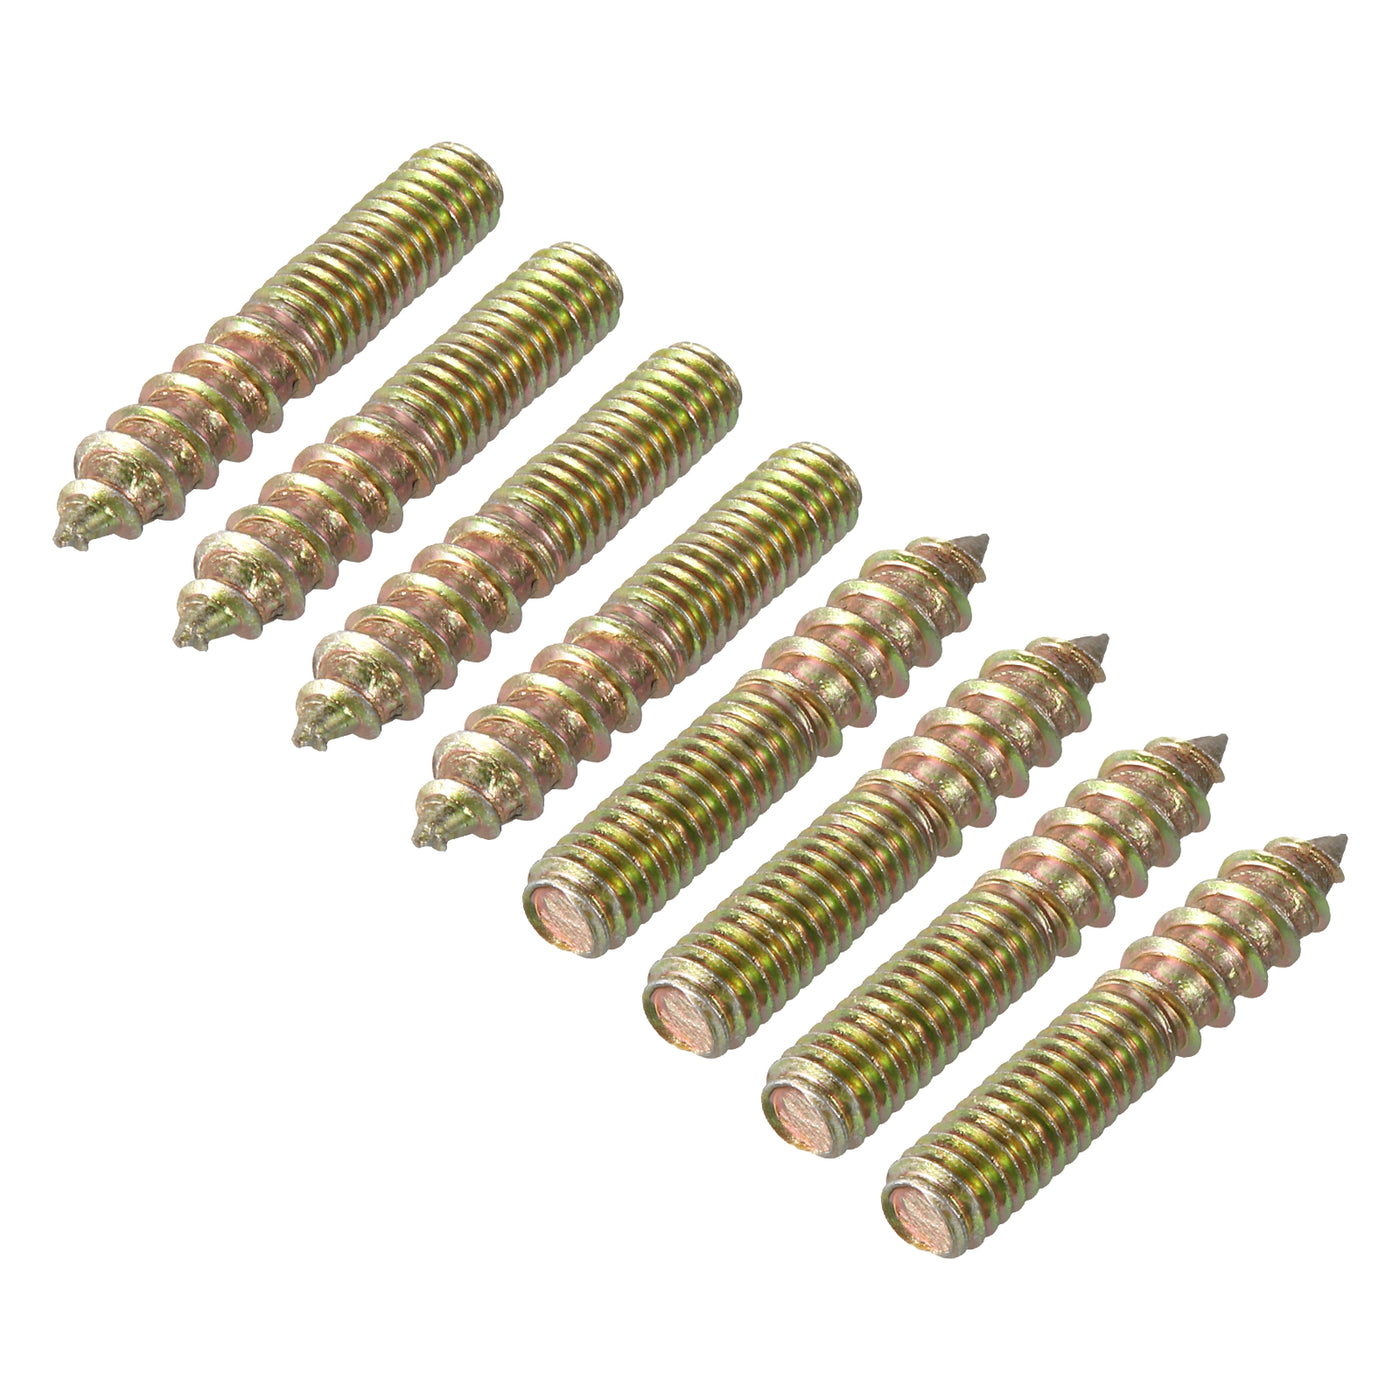 uxcell Uxcell 30Pcs M6x30mm Hanger Bolt Double Headed Bolt Self-Tapping Screw for Furniture